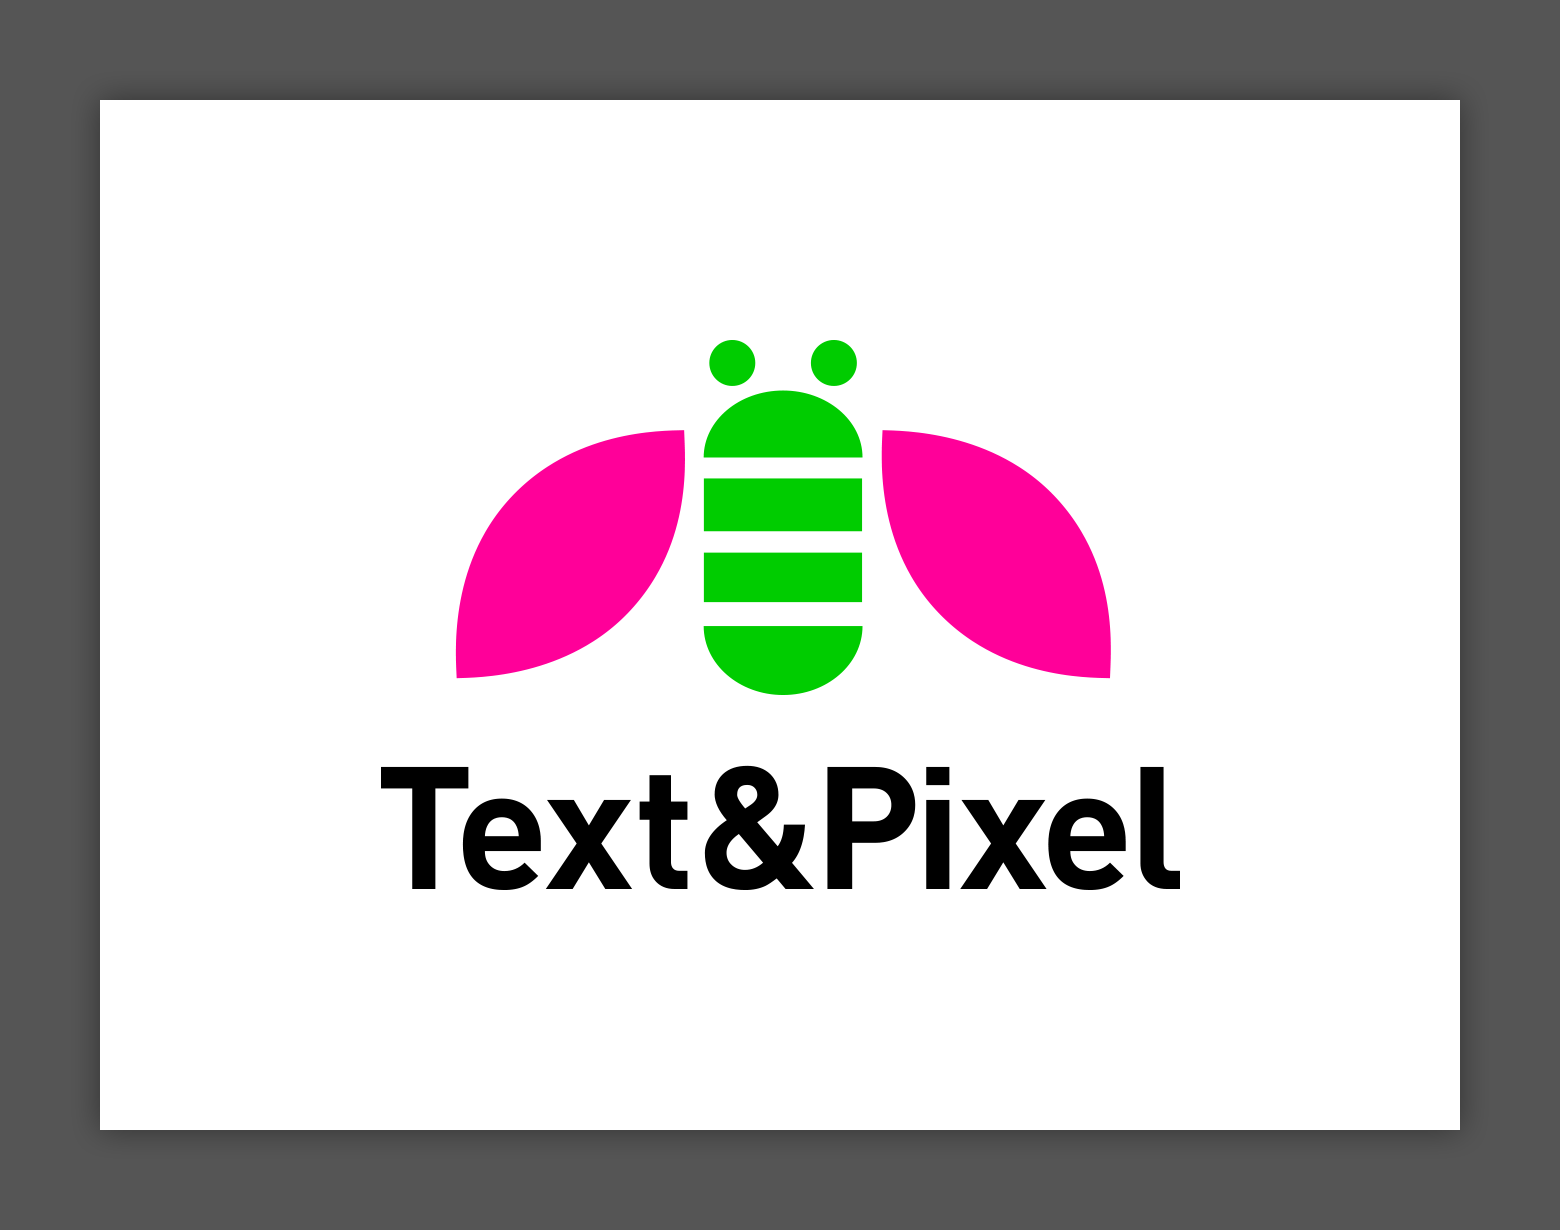 The Text&Pixel logo is a bee with a green body and pink wings